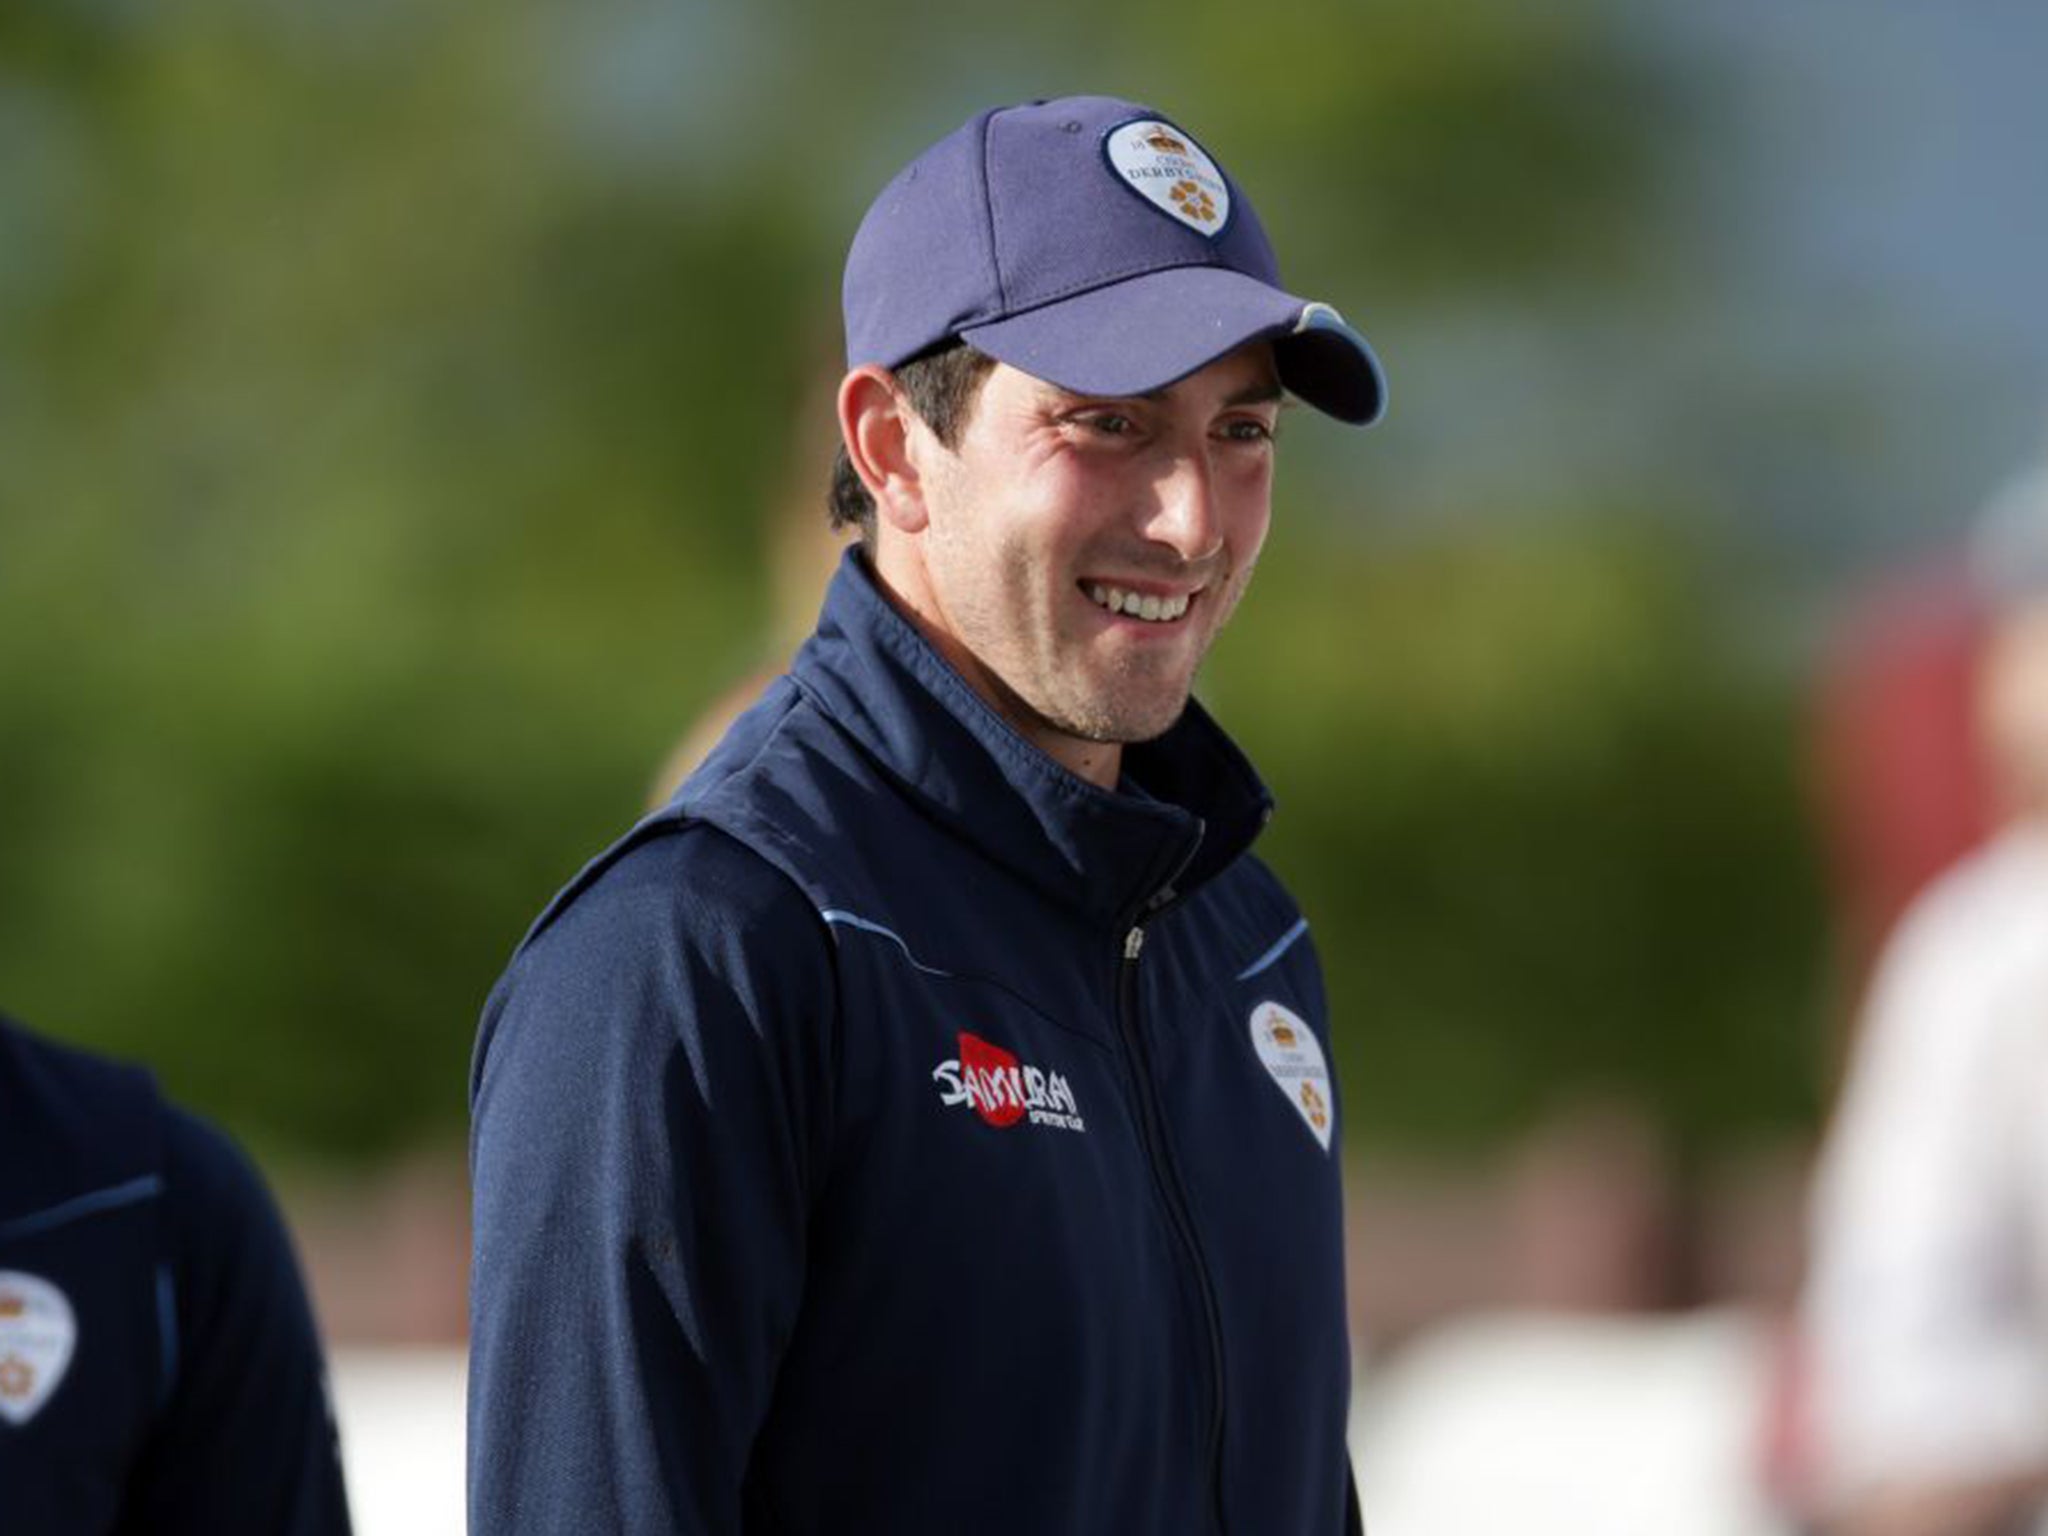 Derbyshire fast bowler Mark Footitt was the leading wicket-taker in England last year